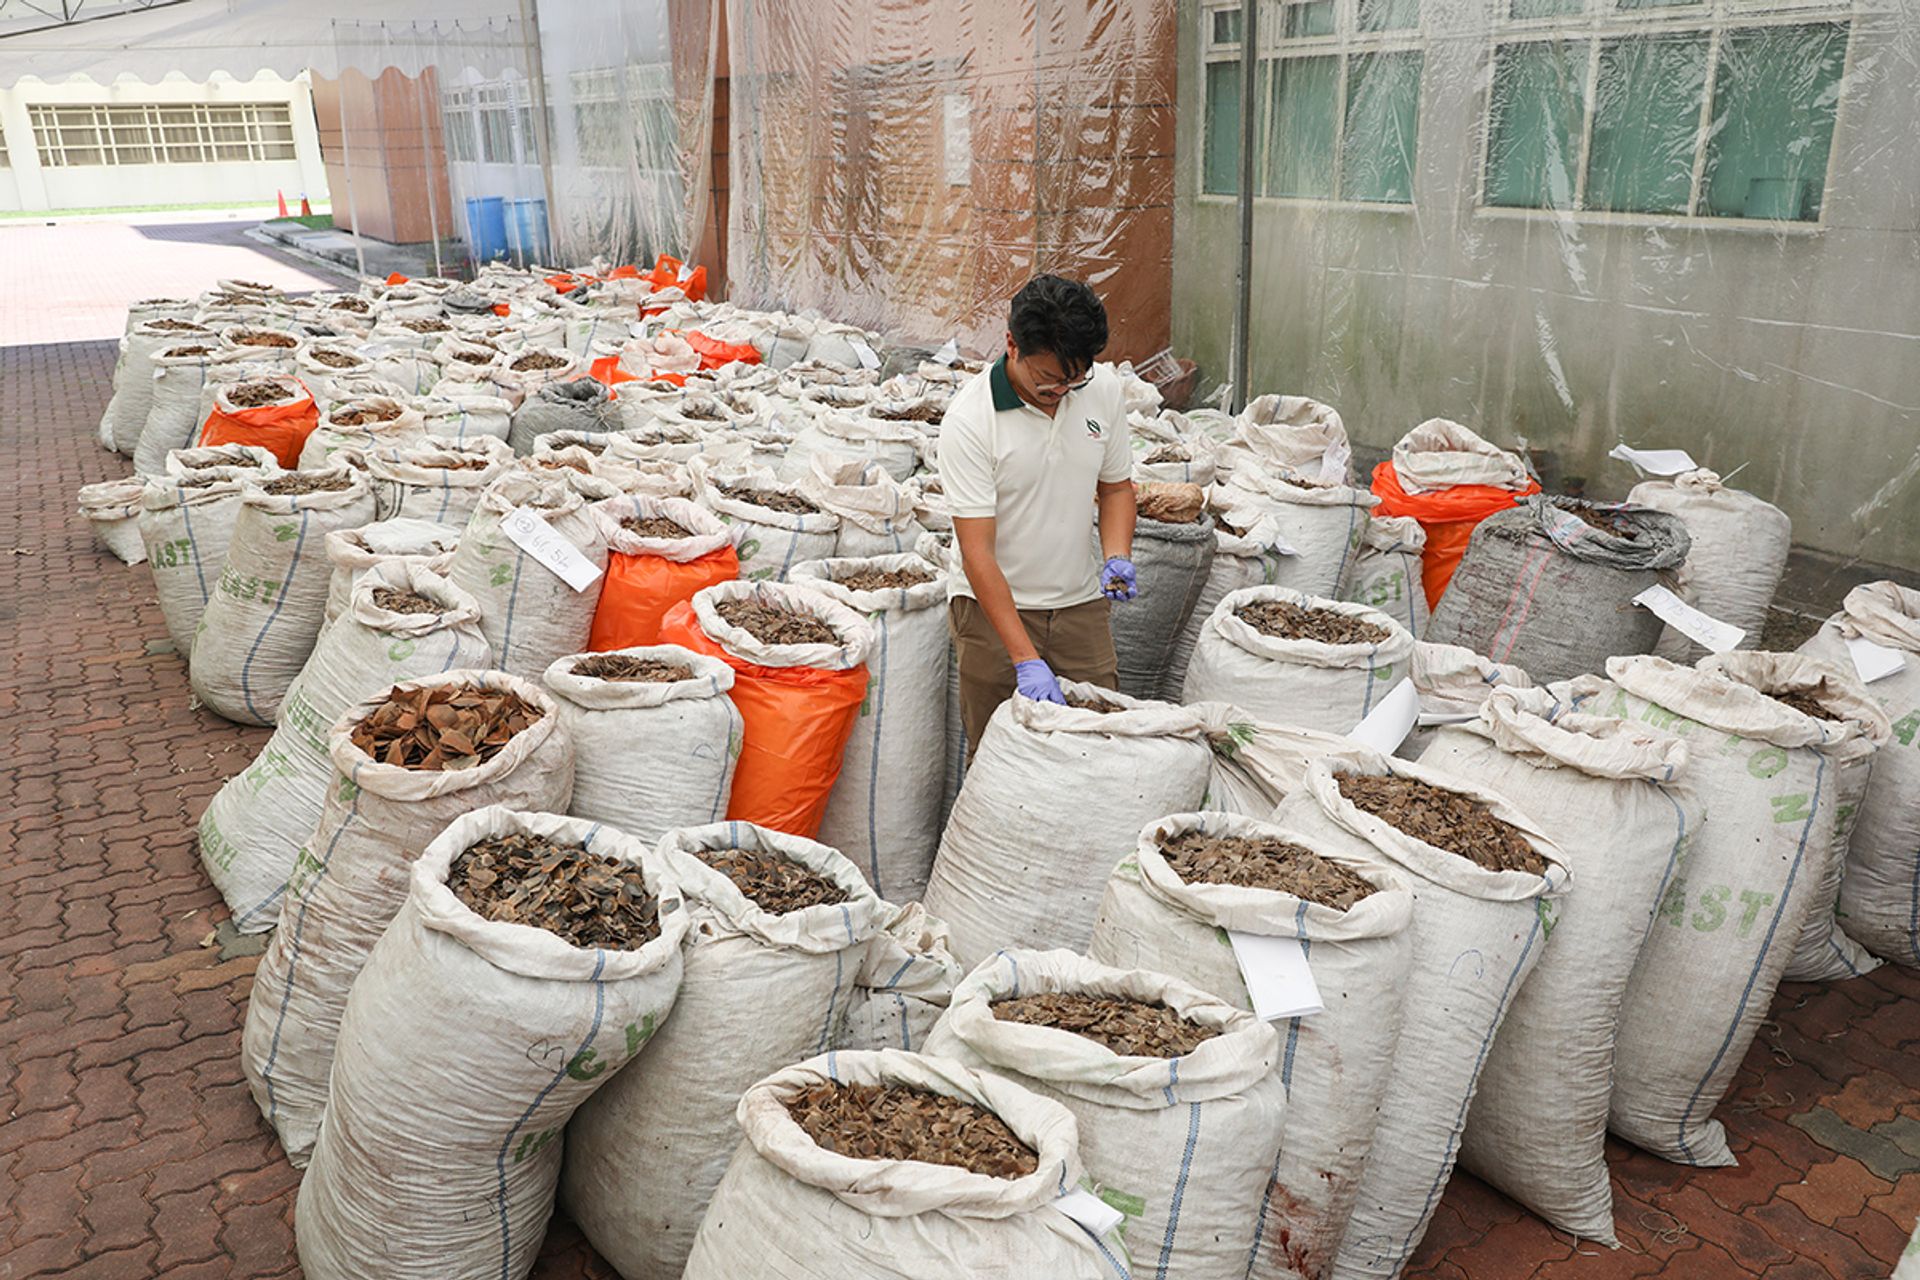 On April 3, 2019, the Singapore authorities seized a world record 12.9 tonnes of pangolin scales worth $52.3 million from a container in Pasir Panjang. ST FILE PHOTOS: ONG WEE JIN